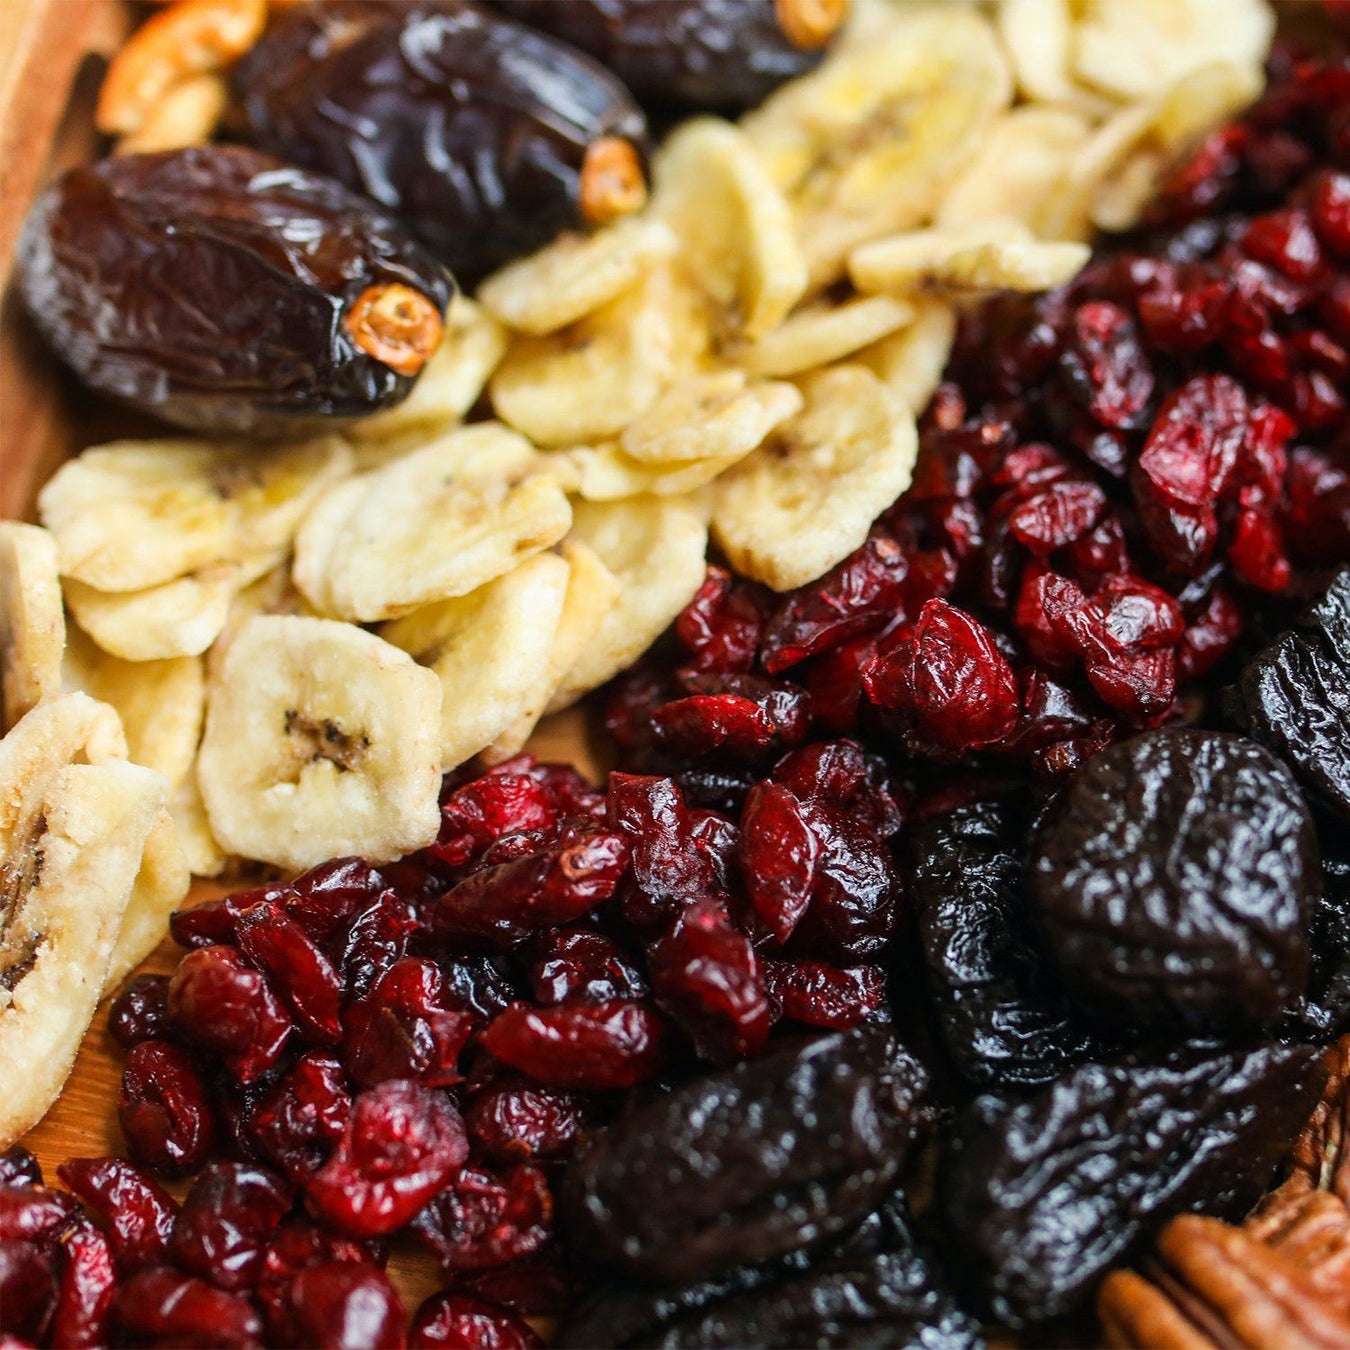 Dried Fruits & Vegetables